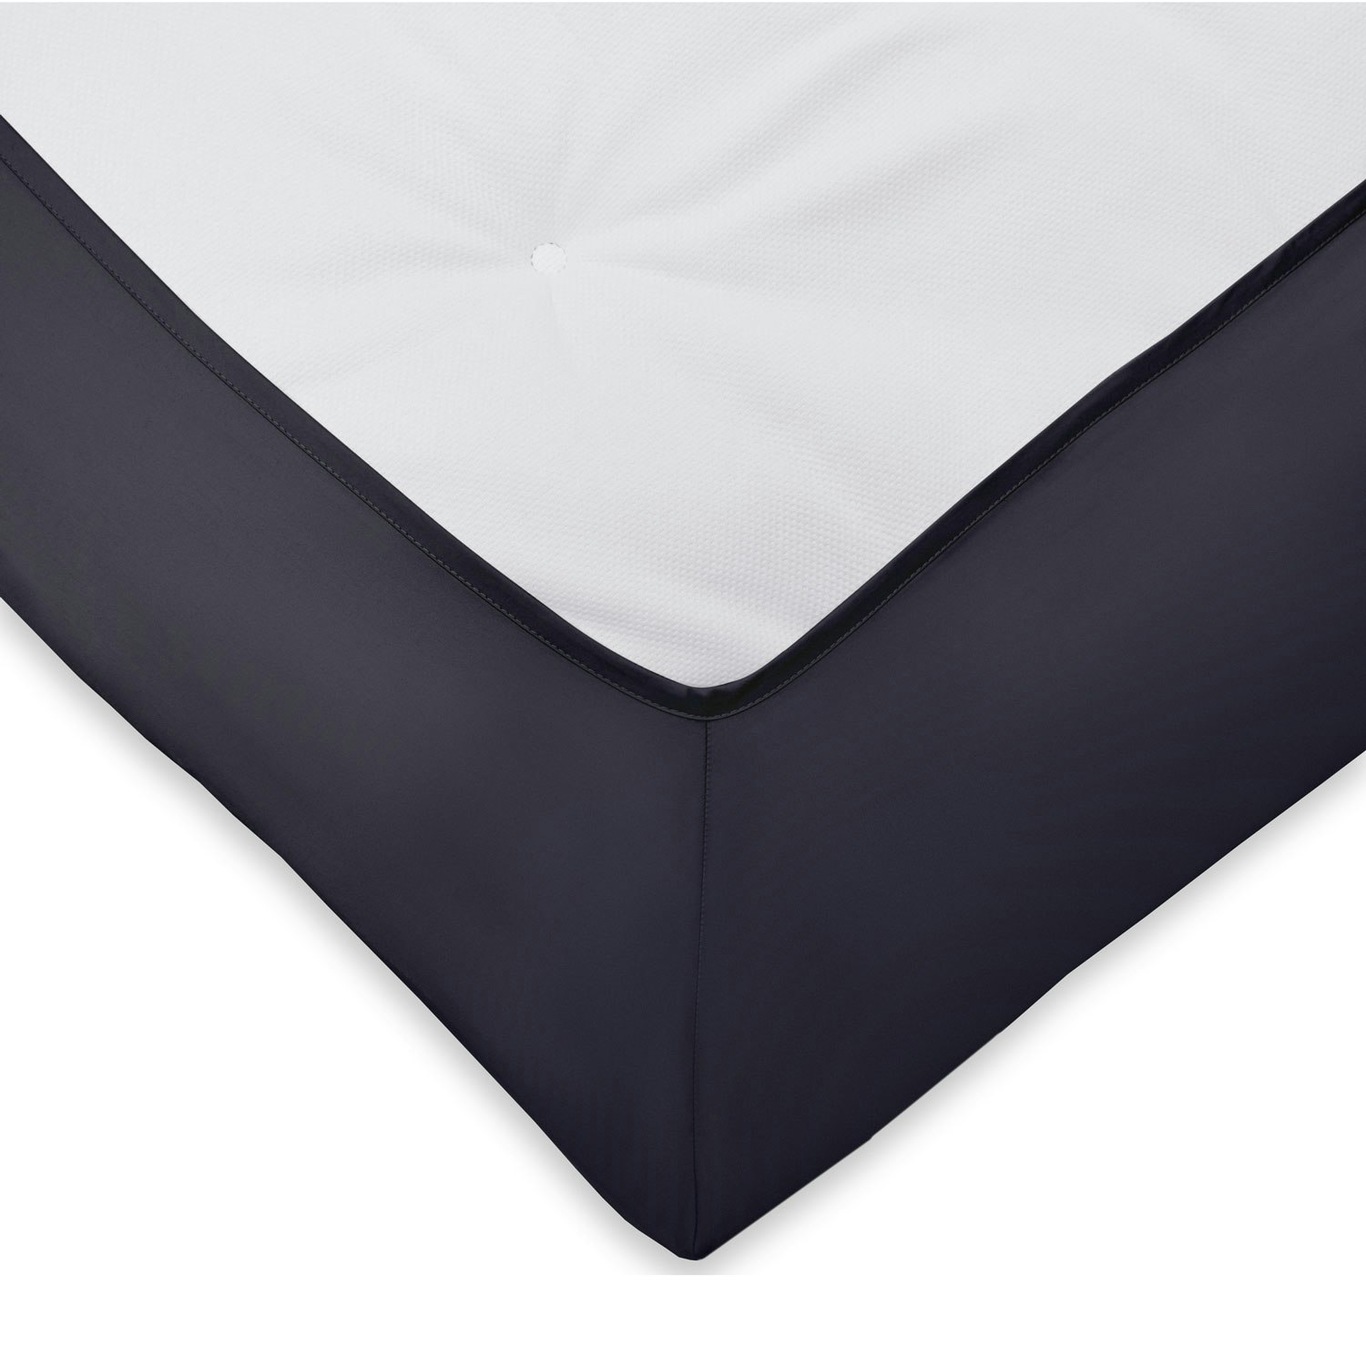 Shade Fitted Sheet Anthracite Grey, 105x200 cm